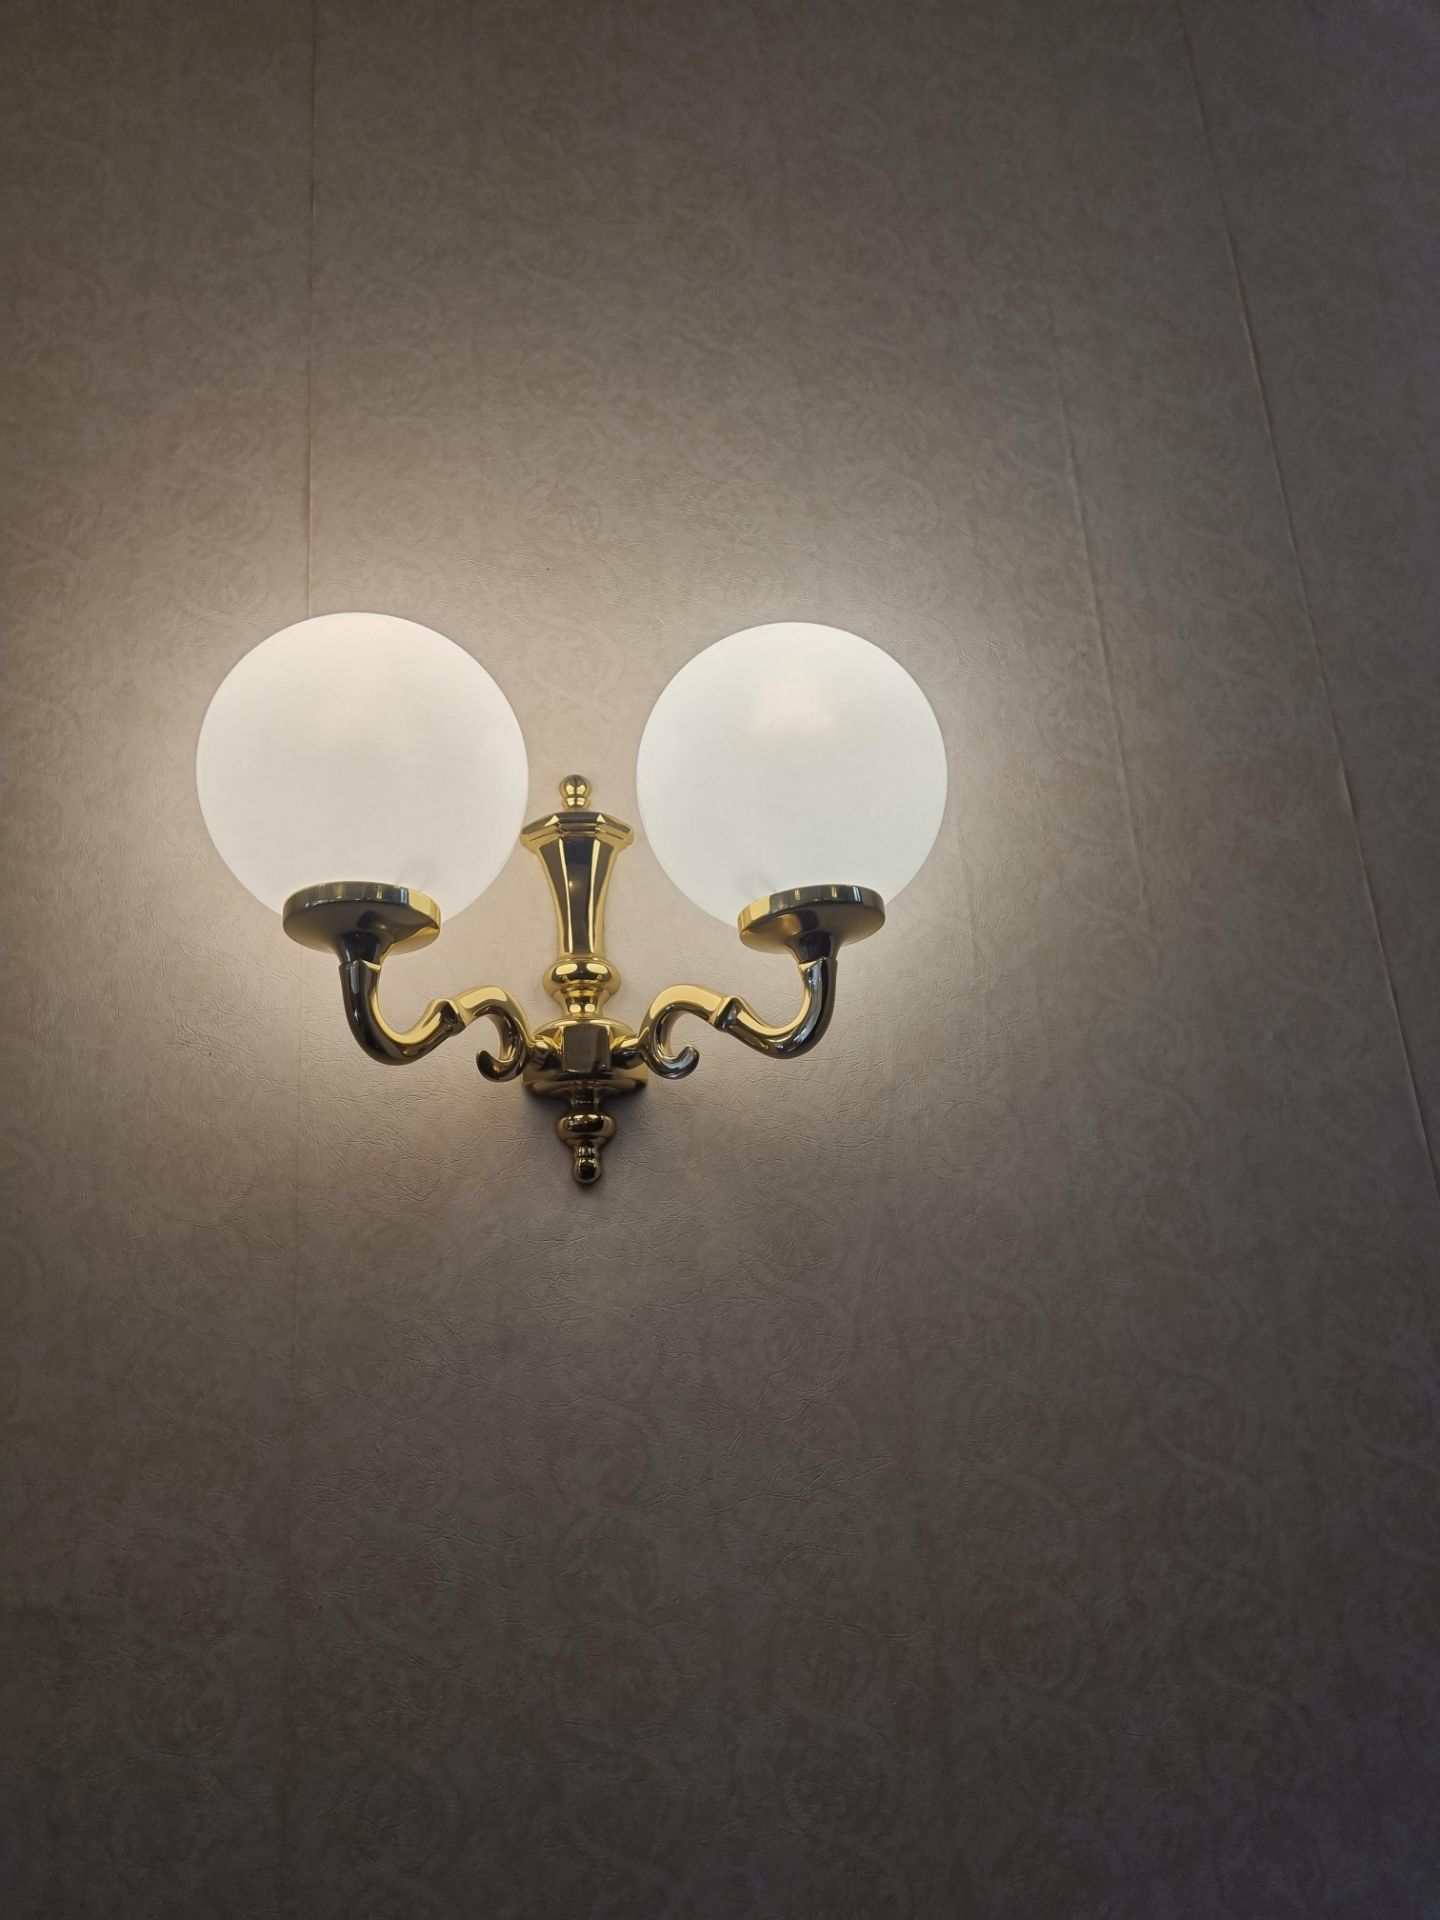 A Pair Of Brass Twin Arm With White Globe Shade Wall Scones Drop W 320mm - Image 2 of 2